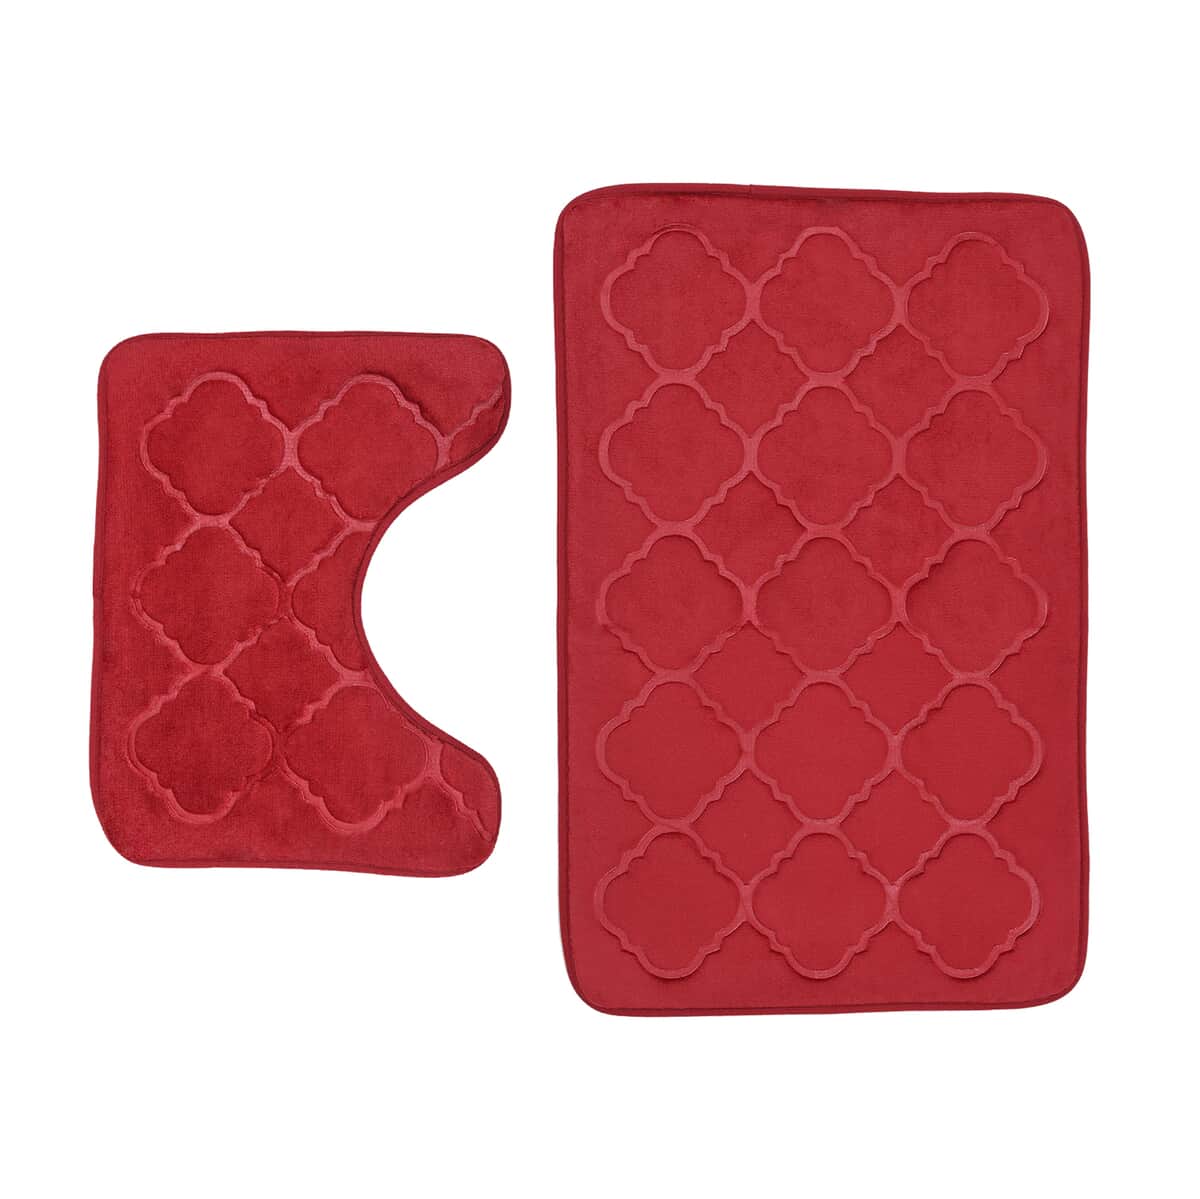 HOMESMART Red Embossed Flannel Non-Woven Anti Slip Dot Backing Bath Mat (19"x31") and Contour Toilet Mat (19"x15") image number 0